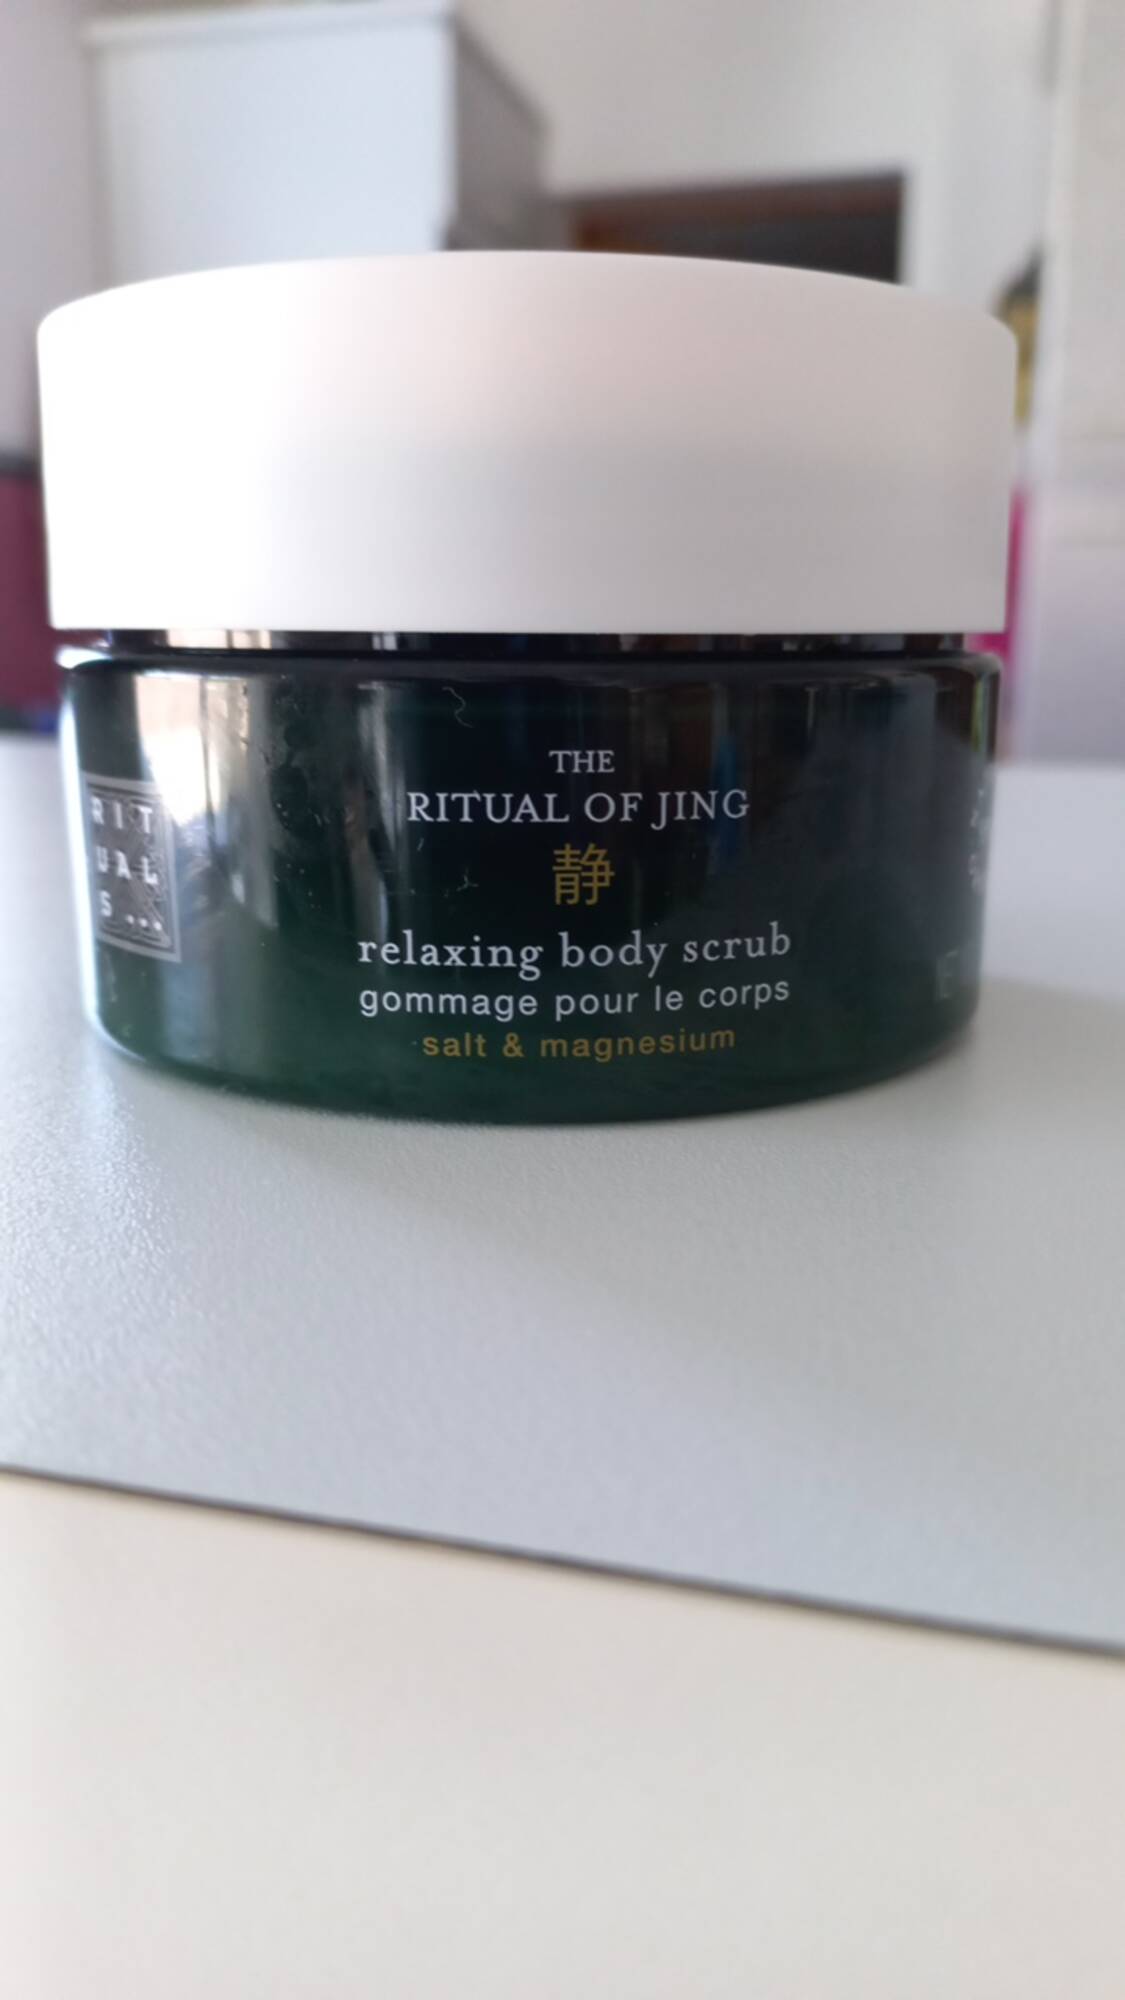 RITUALS - The ritual of jing - Gommage pour le corps